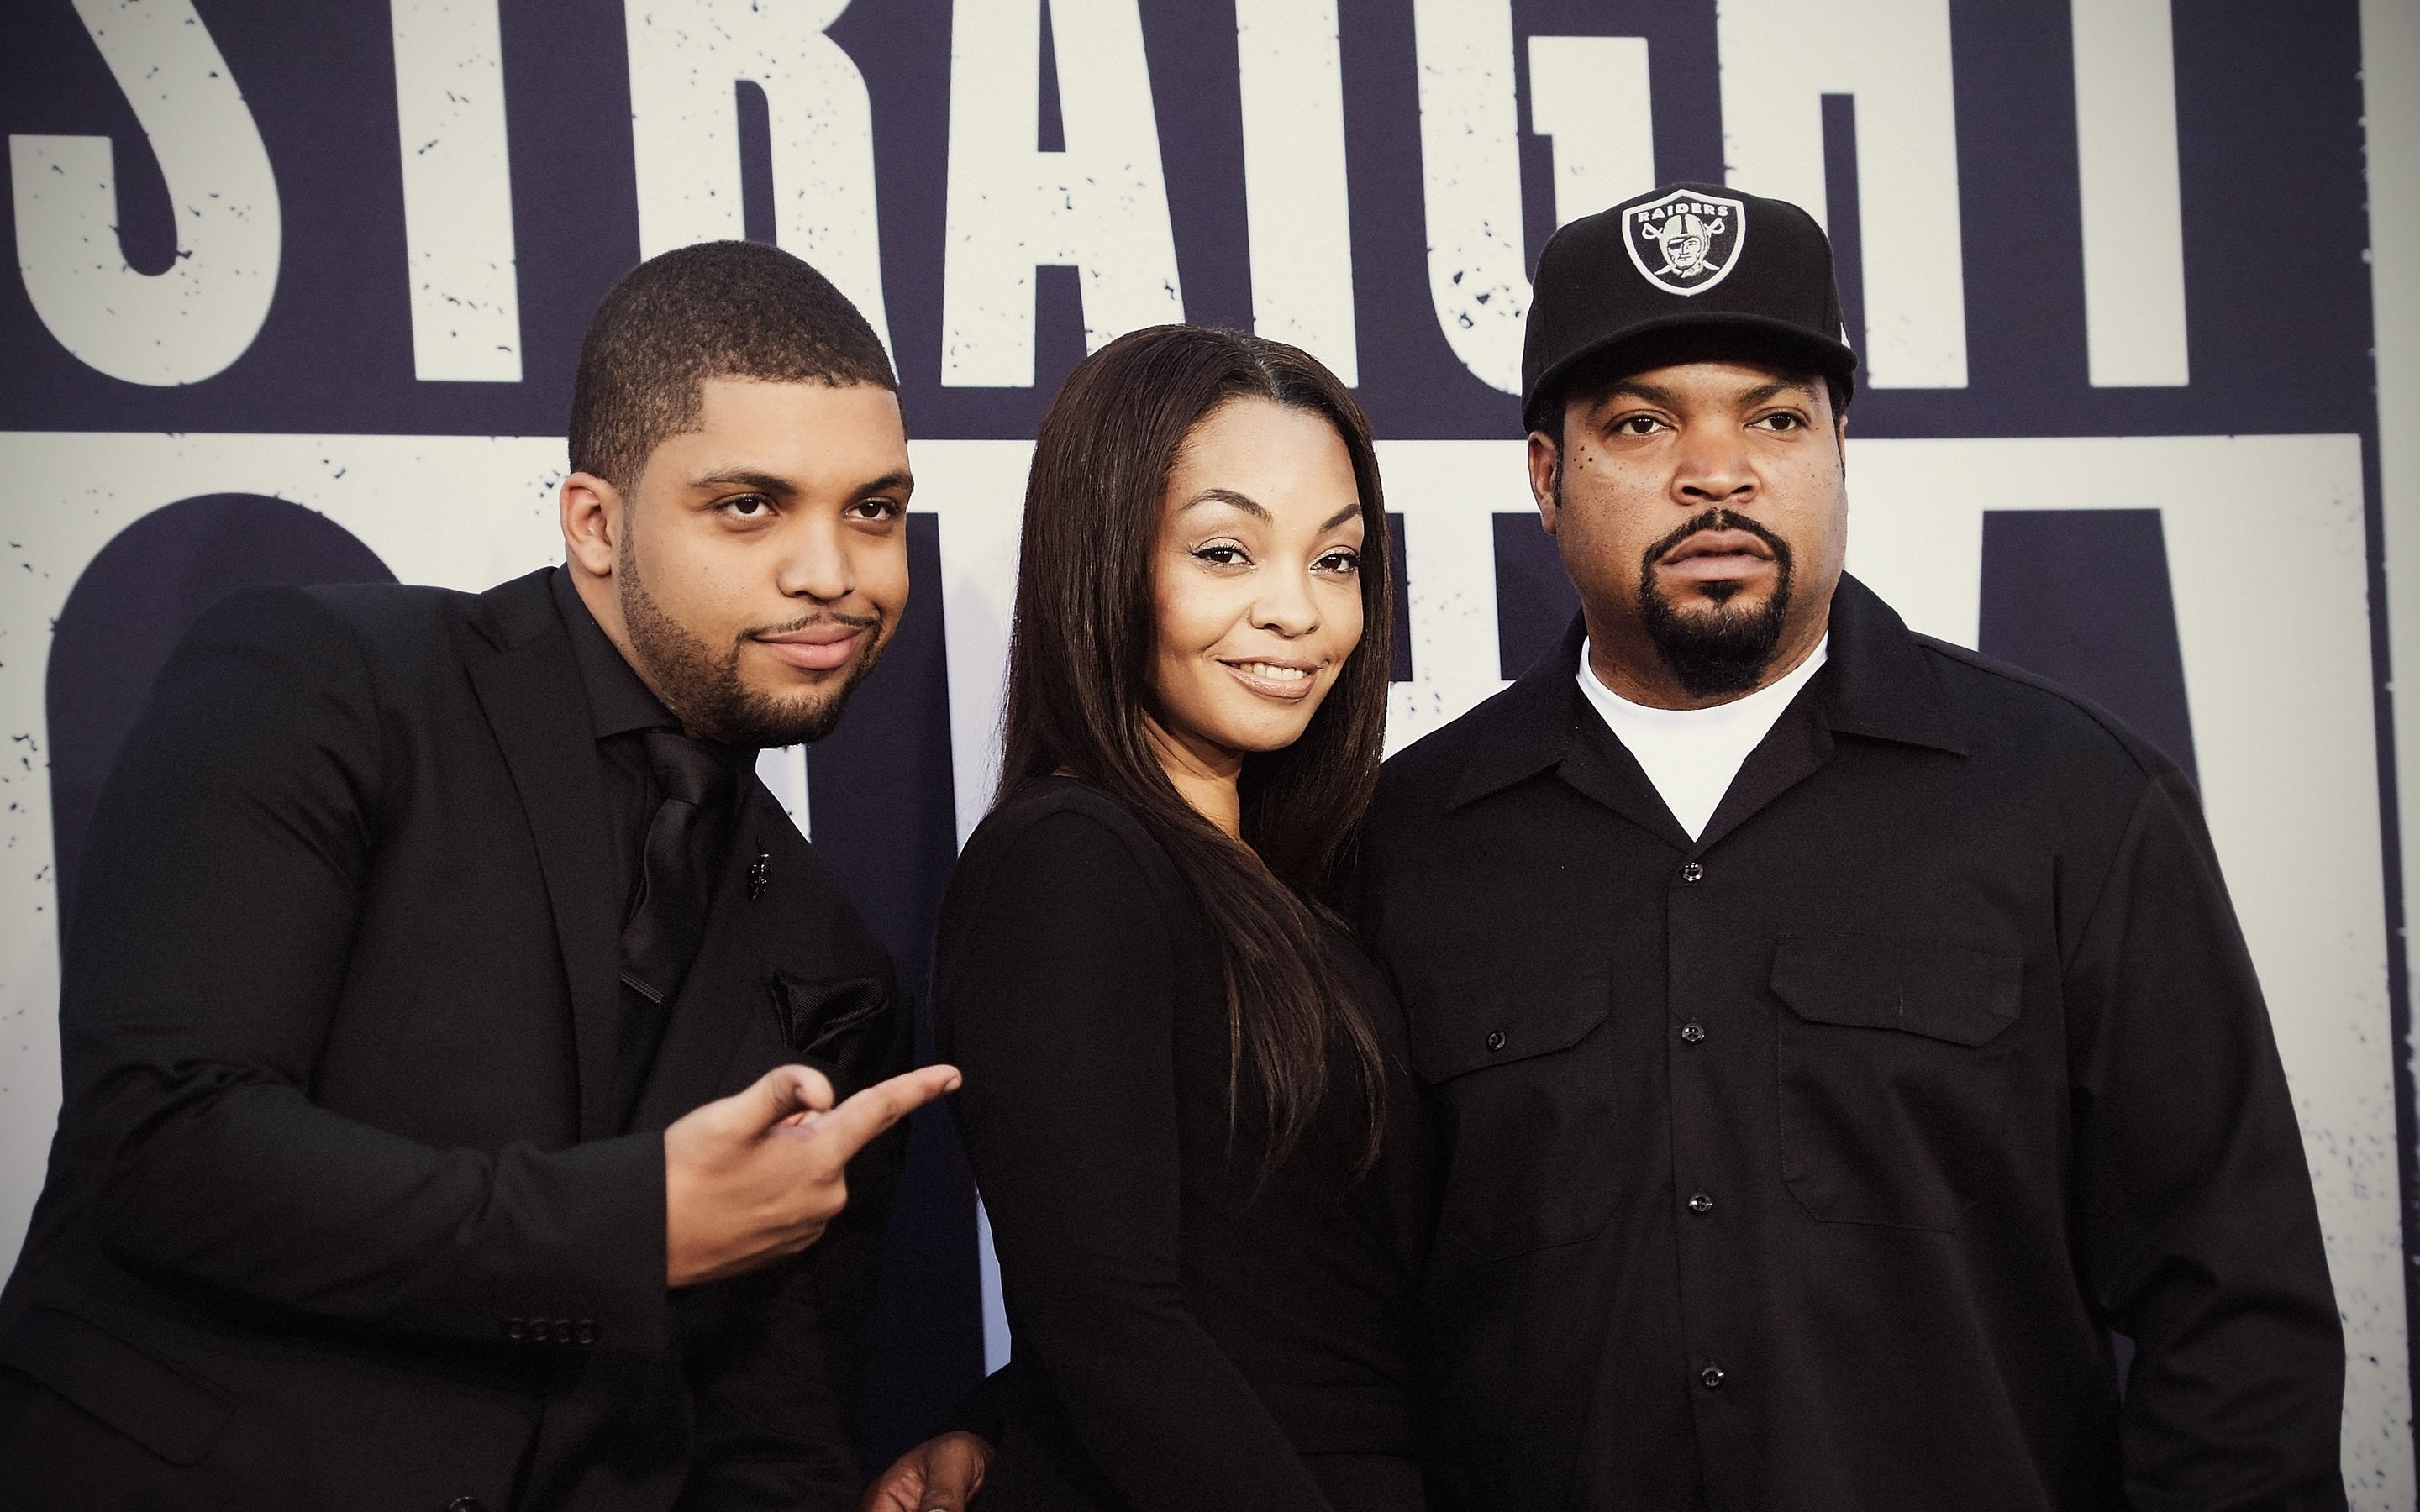 Straight Outta Compton O'Shea Jackson and Ice Cube for 2880 x 1800 Retina Display resolution